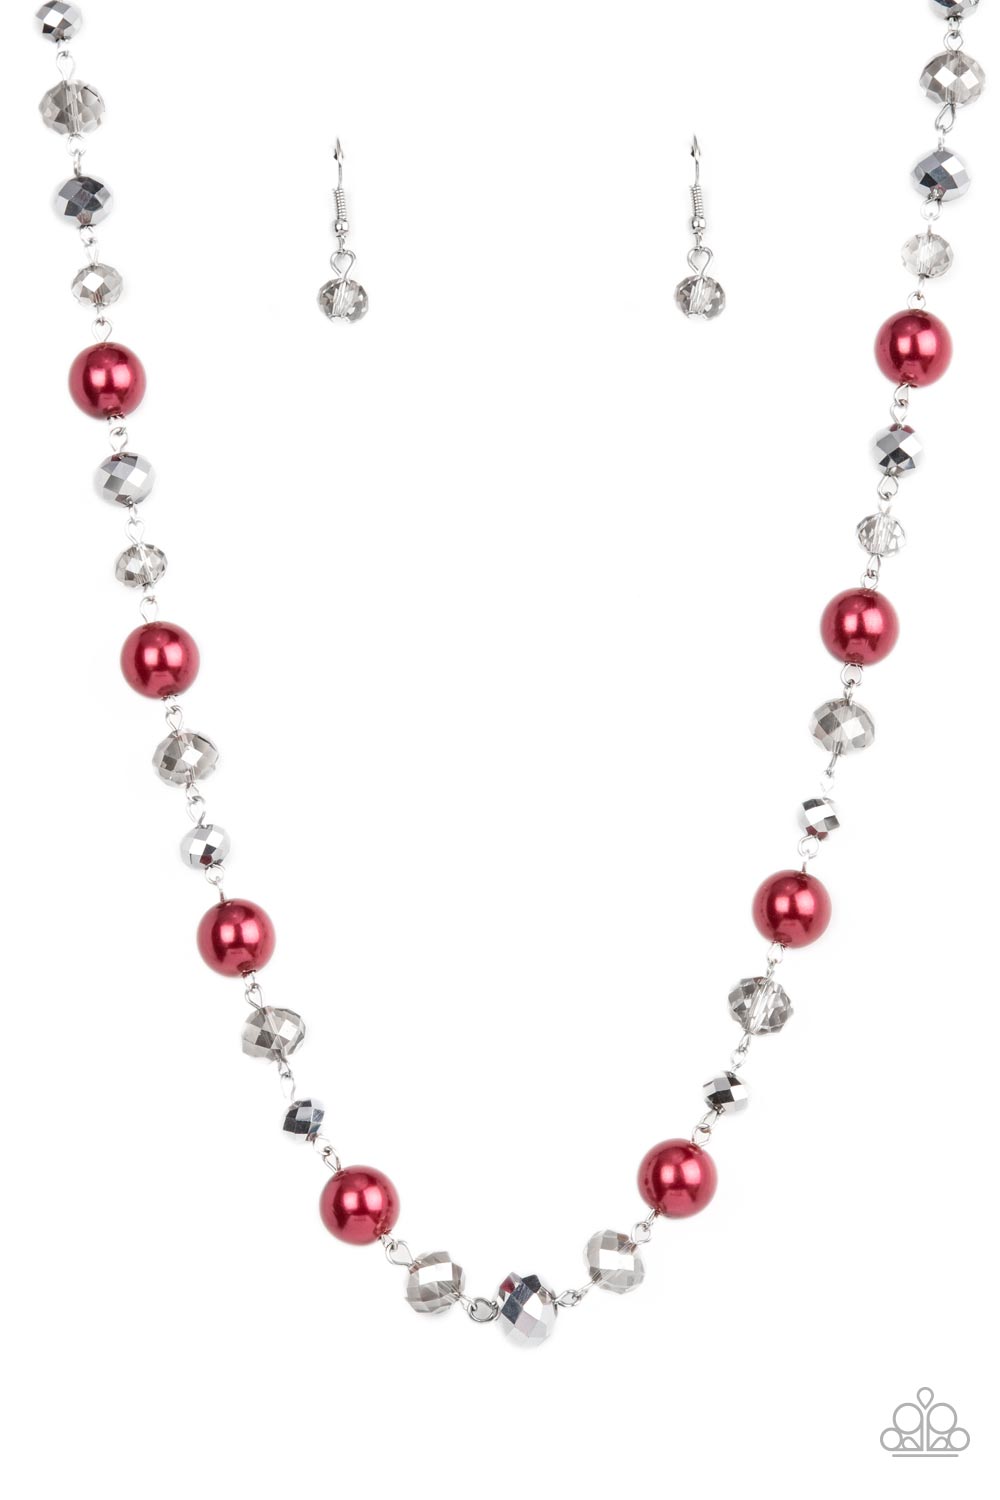 Decked Out Dazzle Red Necklace - Paparazzi Accessories  A glamorous collection of oversized pearly red beads, metallic-flecked and smoky crystal-like beads delicately links below the collar, resulting a glitzy pop of color. Features an adjustable clasp closure.  Sold as one individual necklace. Includes one pair of matching earrings.